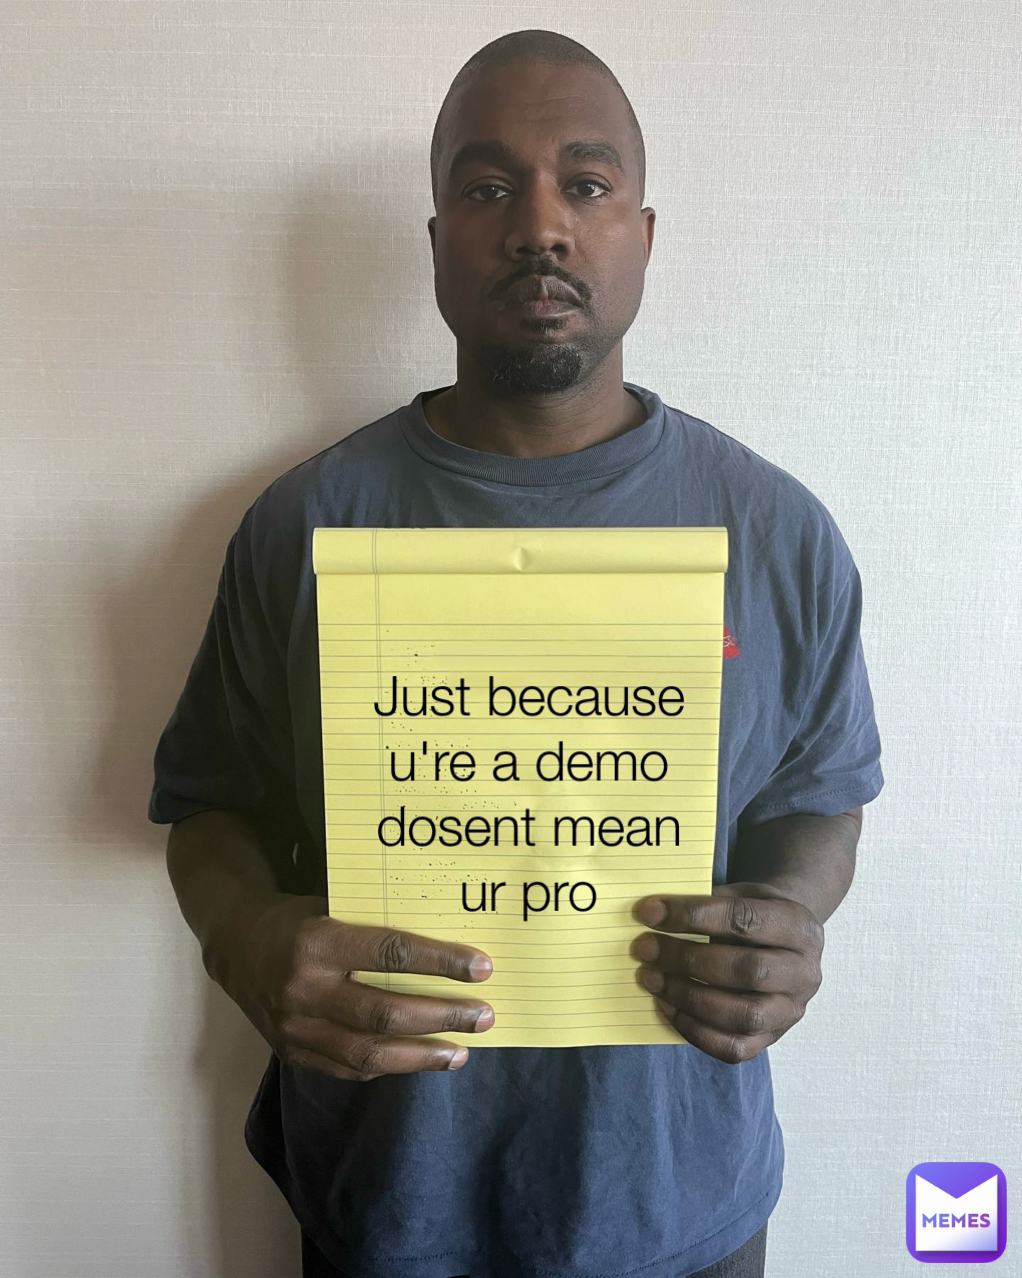 Just because u're a demo dosent mean ur pro